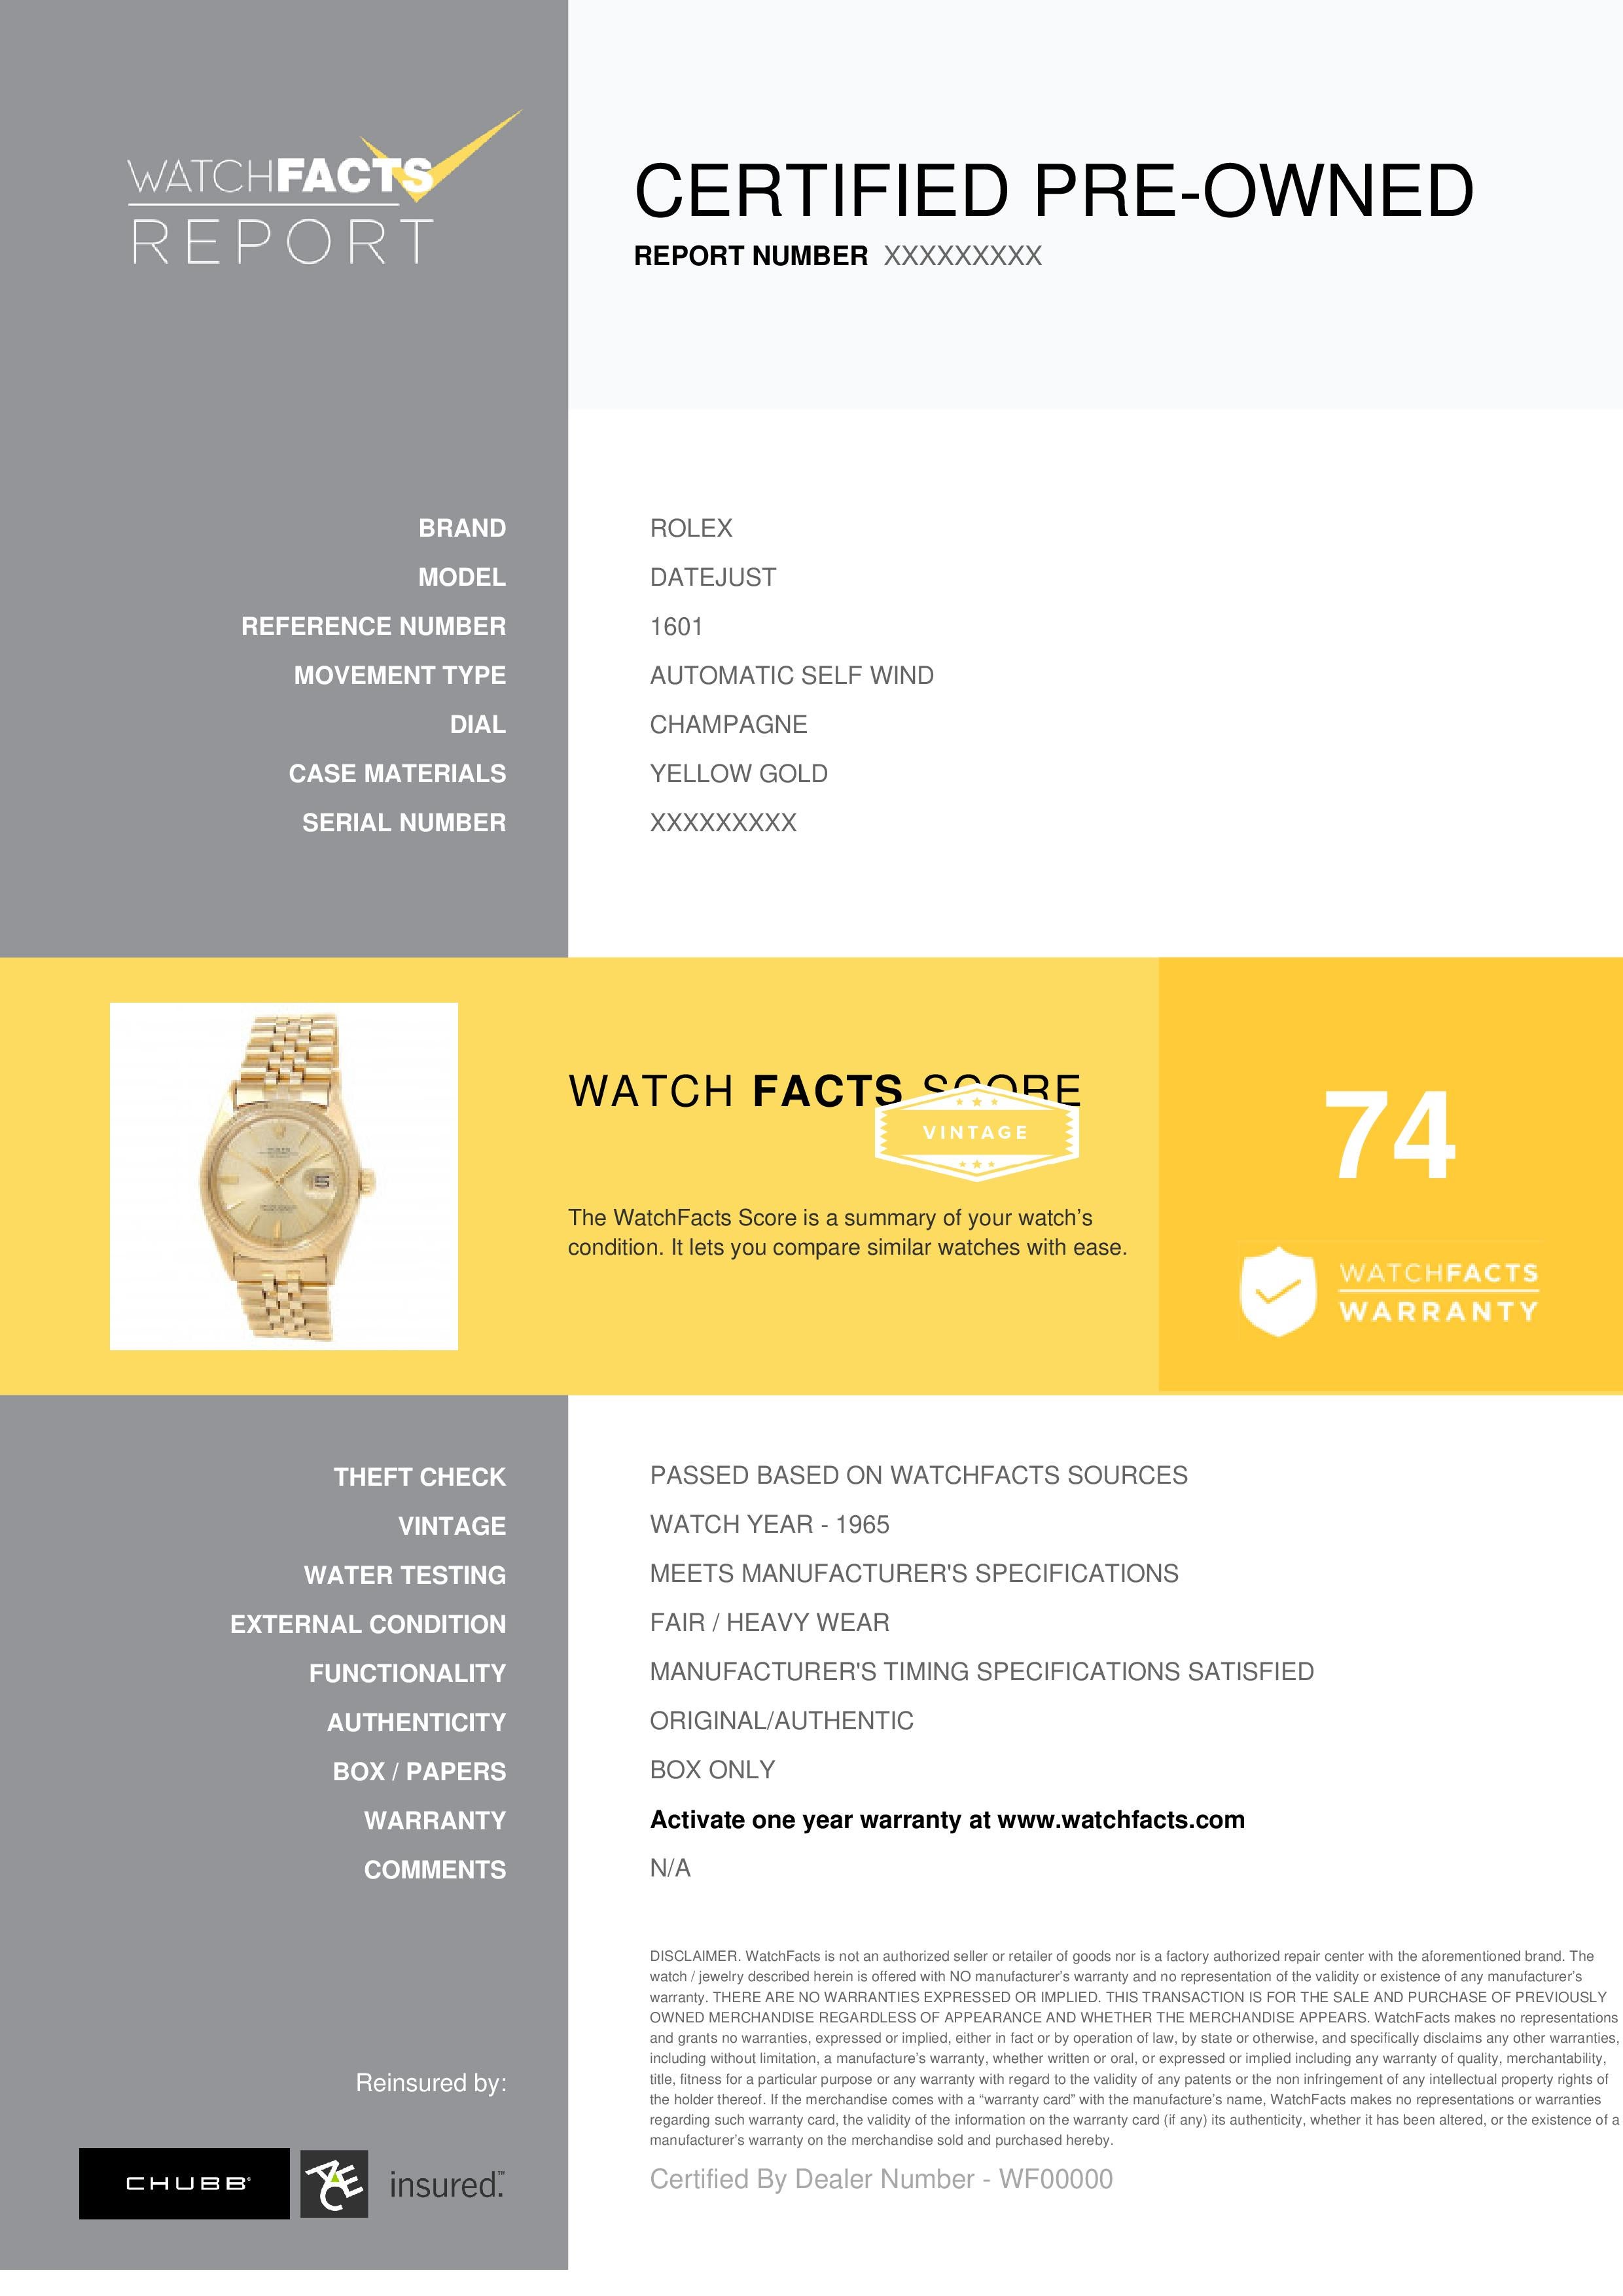 Rolex Datejust Reference #: 1601. Mens Automatic Self Wind Watch Yellow Gold Champagne 36 MM. Verified and Certified by WatchFacts. 1 year warranty offered by WatchFacts.
